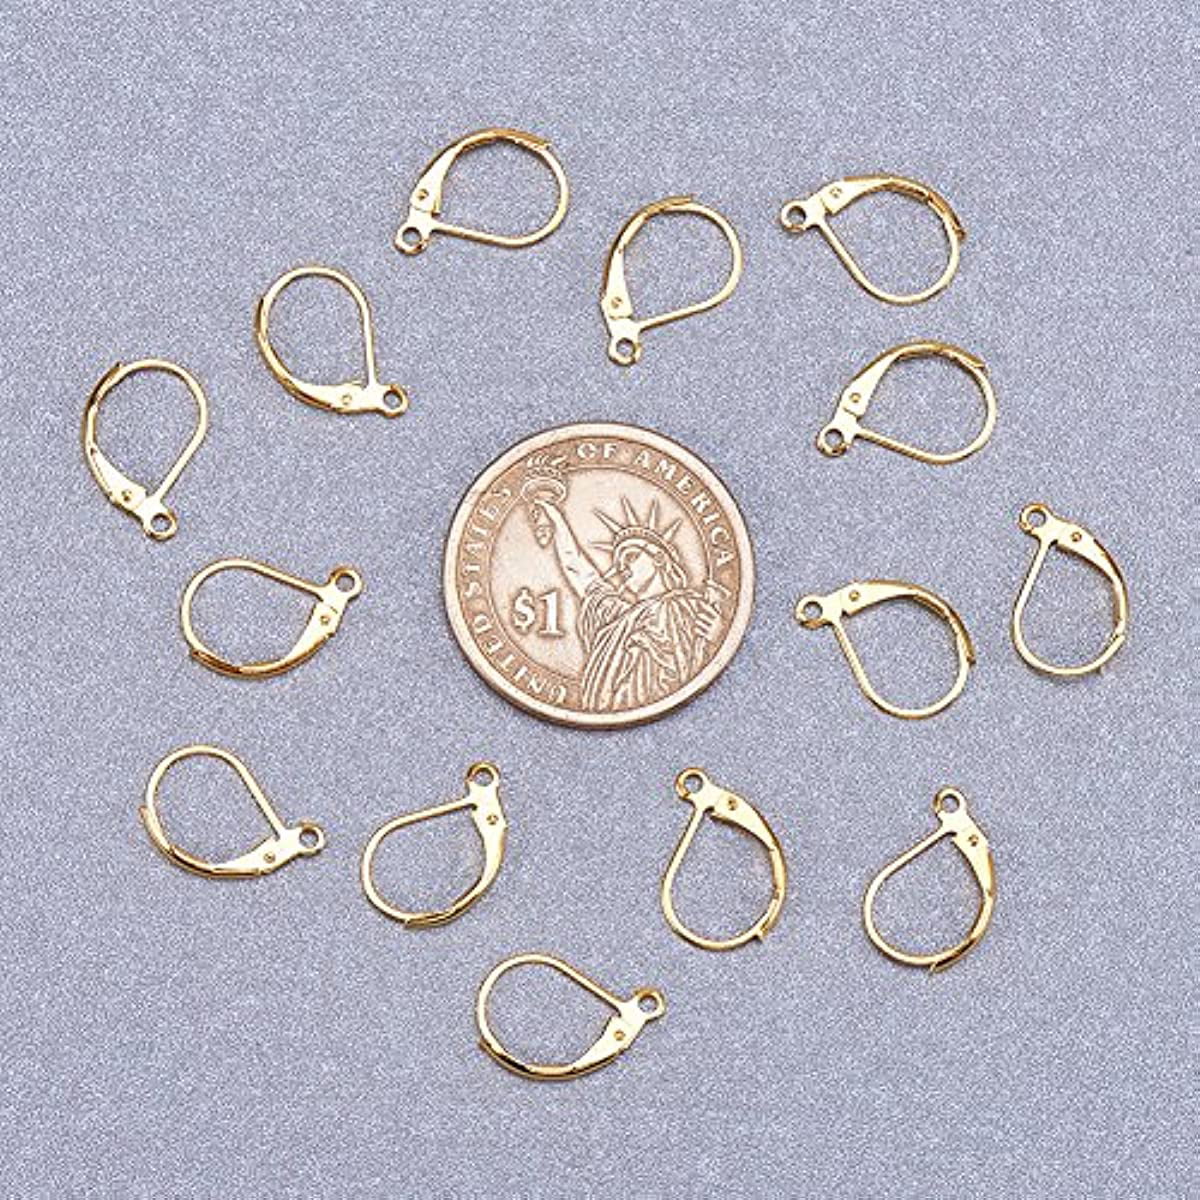  Ciieeo 24Pcs Chain Link Trigger Spring O Ring Round